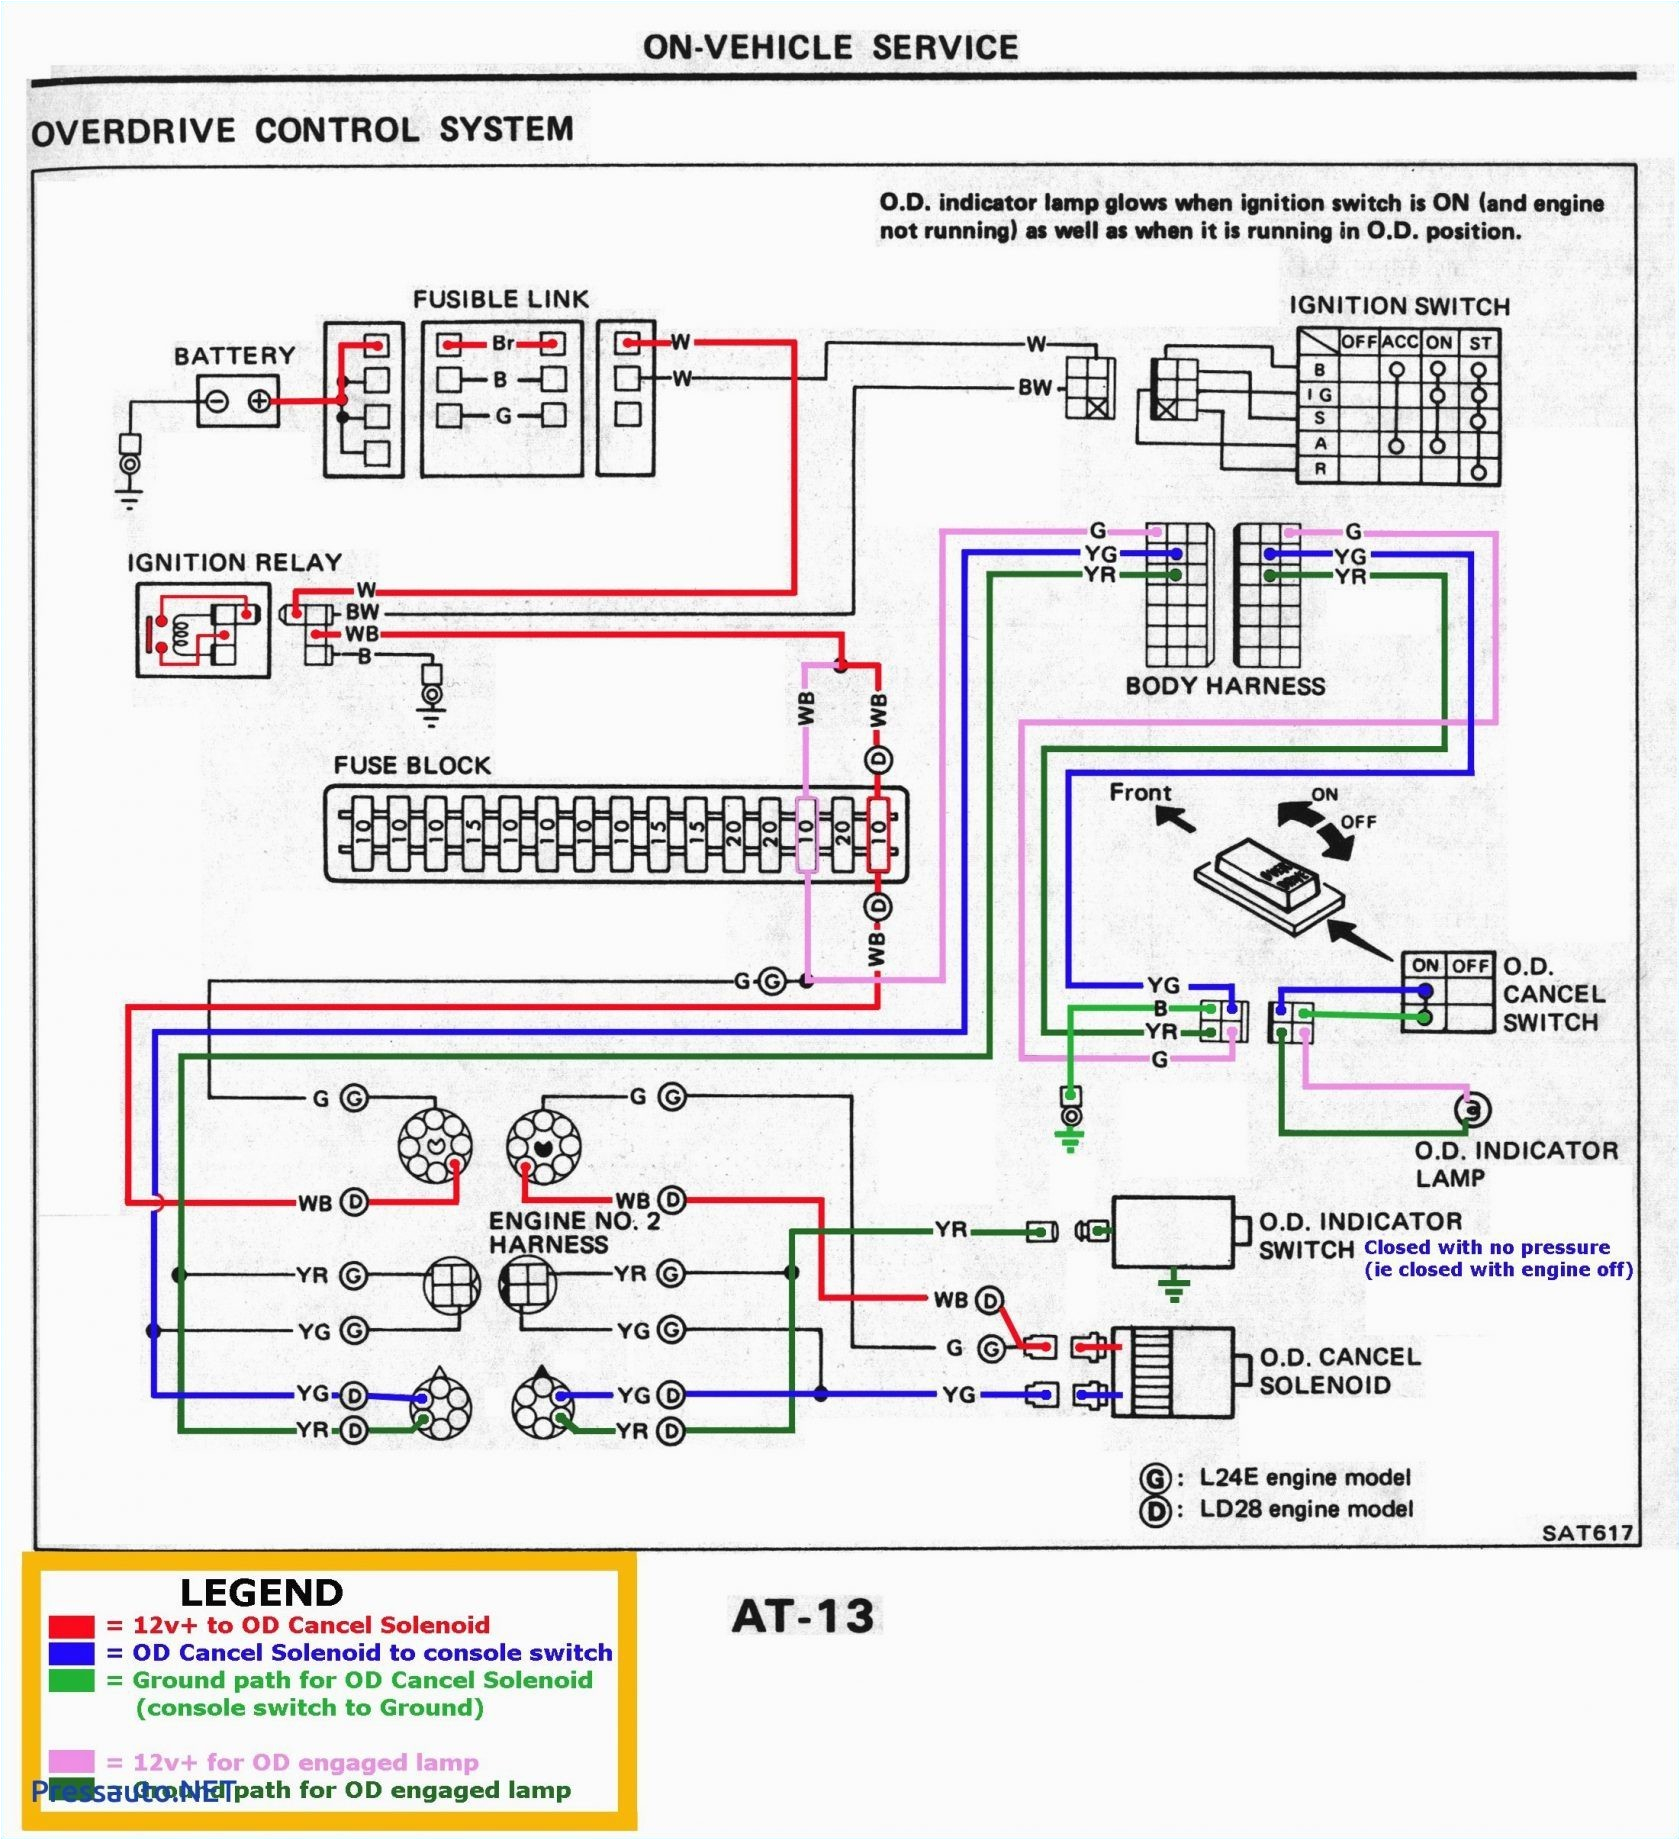 Ford Stereo Wiring Harness Diagram Wiring Harness Diagram Likewise Bmw Car Radio Wiring Harness On Bmw